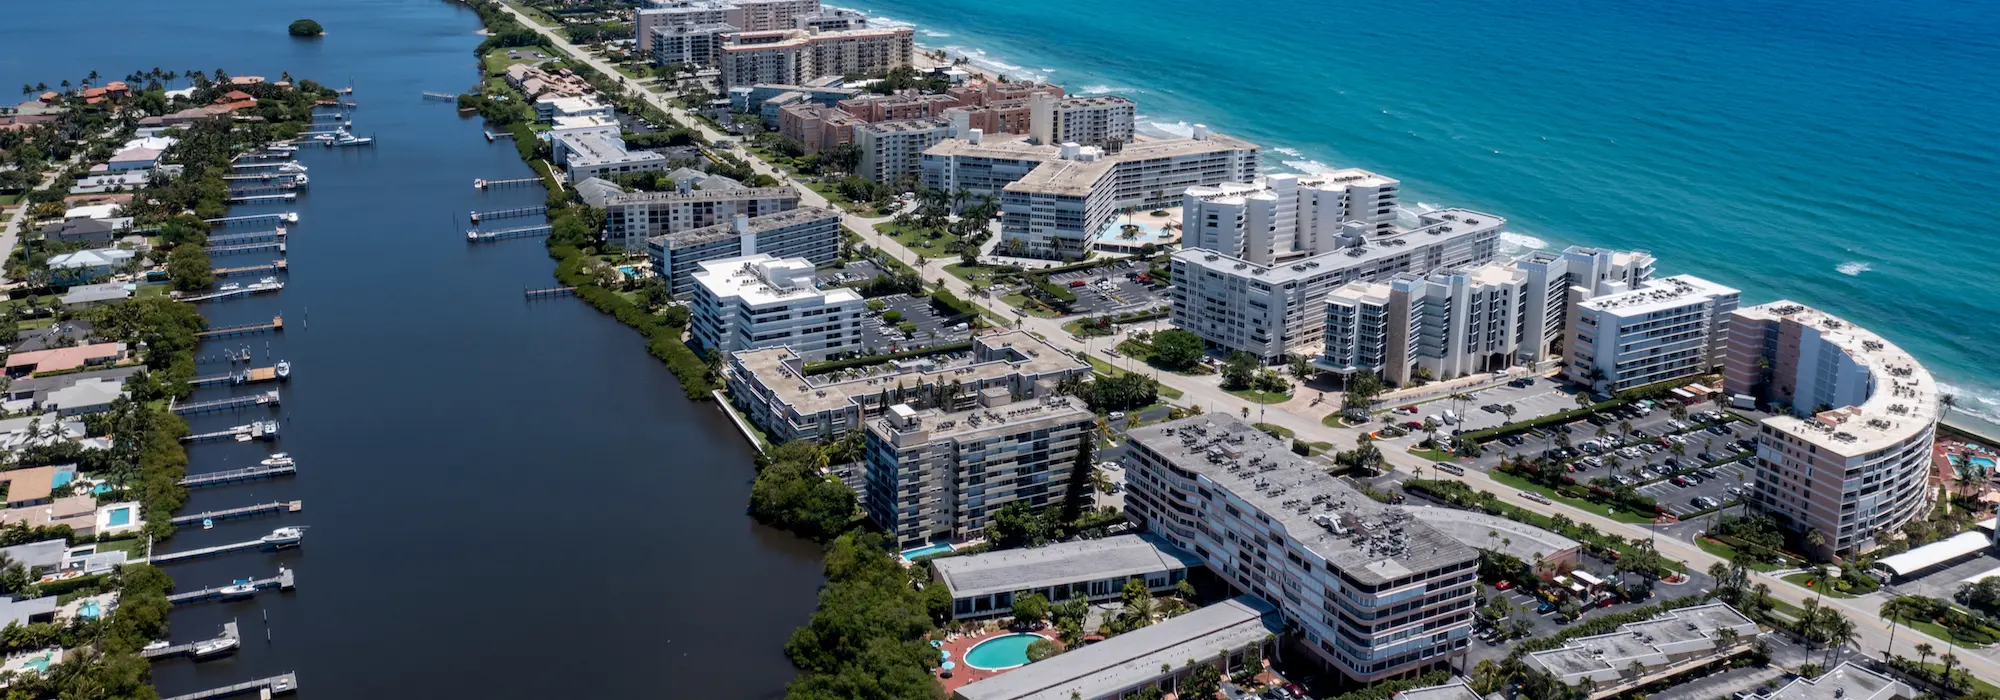 Palm Beach Condos for Sale and Rent | Condos for Sale in Palm Beach FL